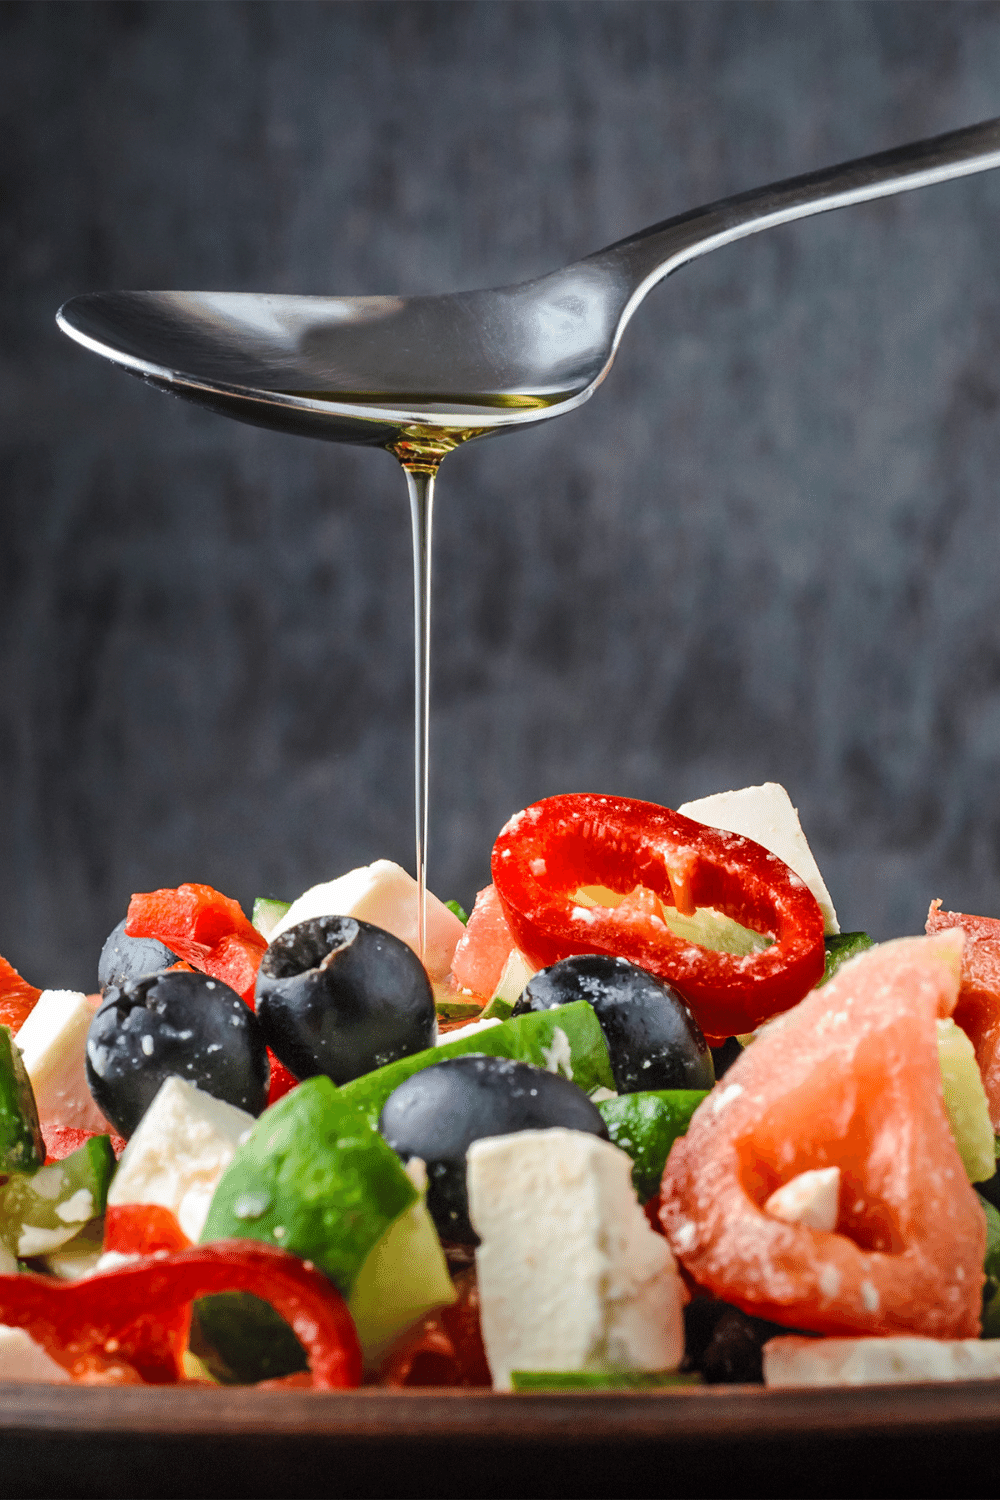 Lemon And Olive Oil: Recipes For A Tasty And Healthy Meal